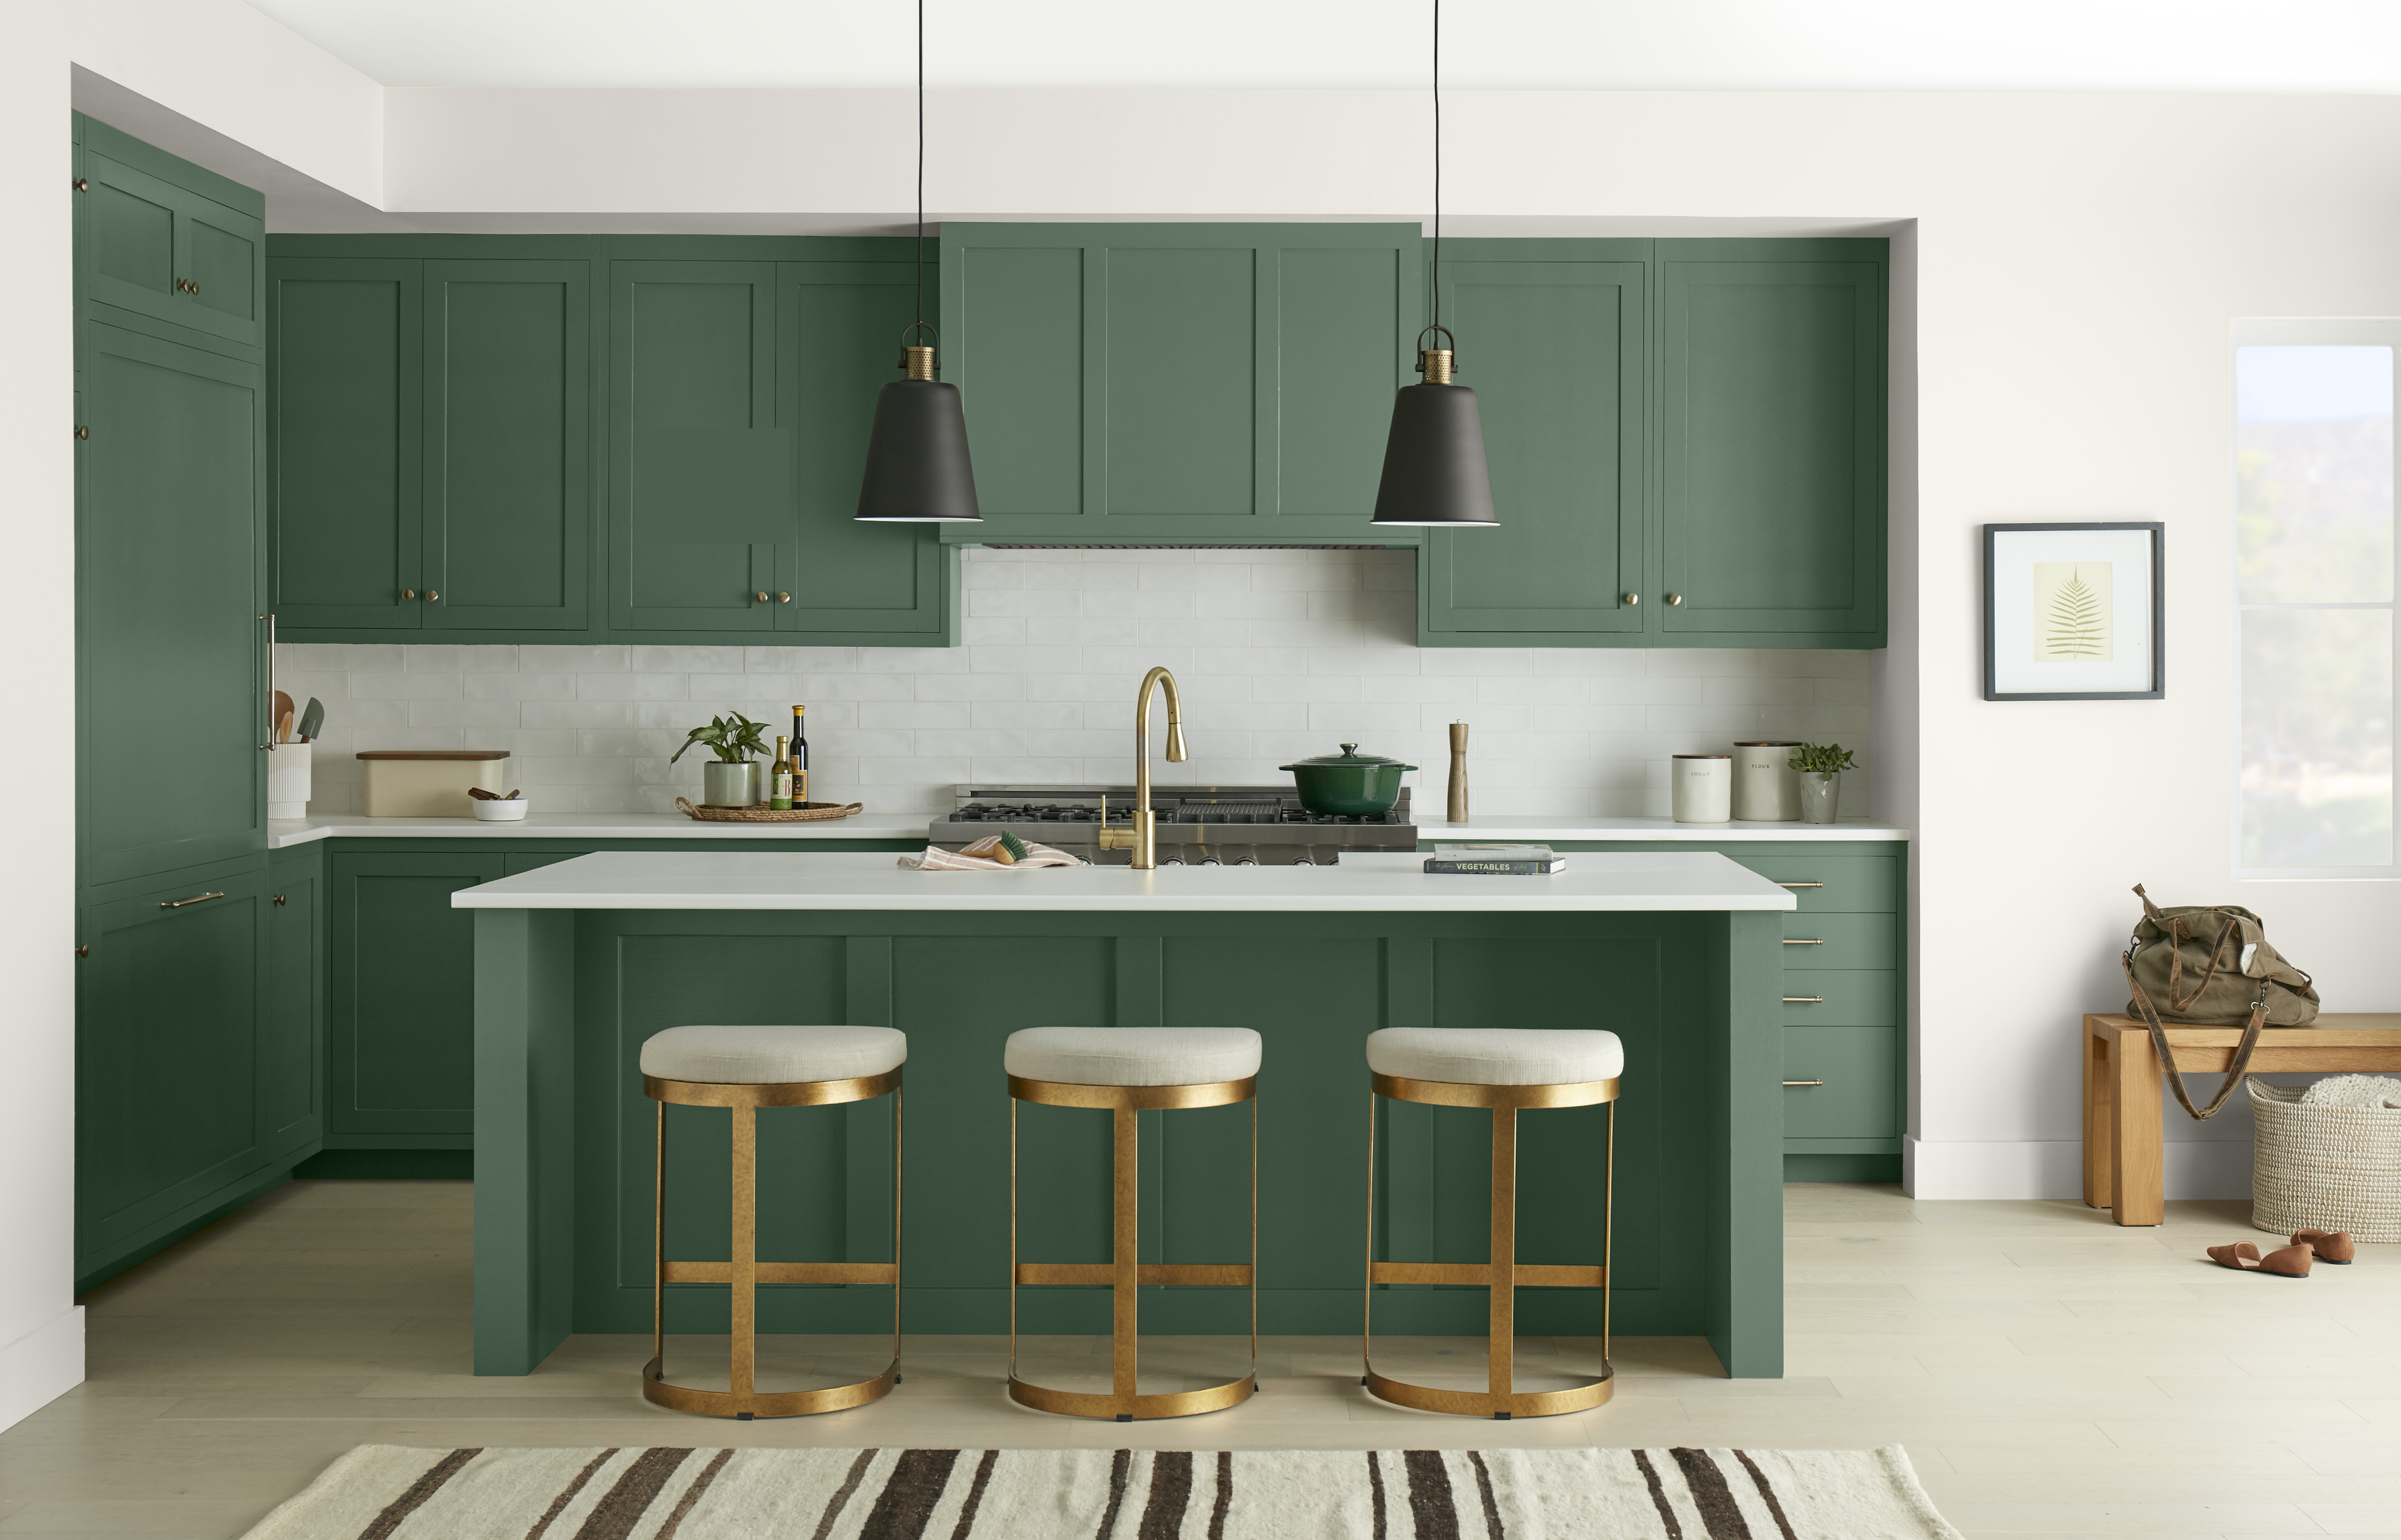 A kitchen with cabinets and an island painted in a deep green colour, styled with modern black and gold finishings.